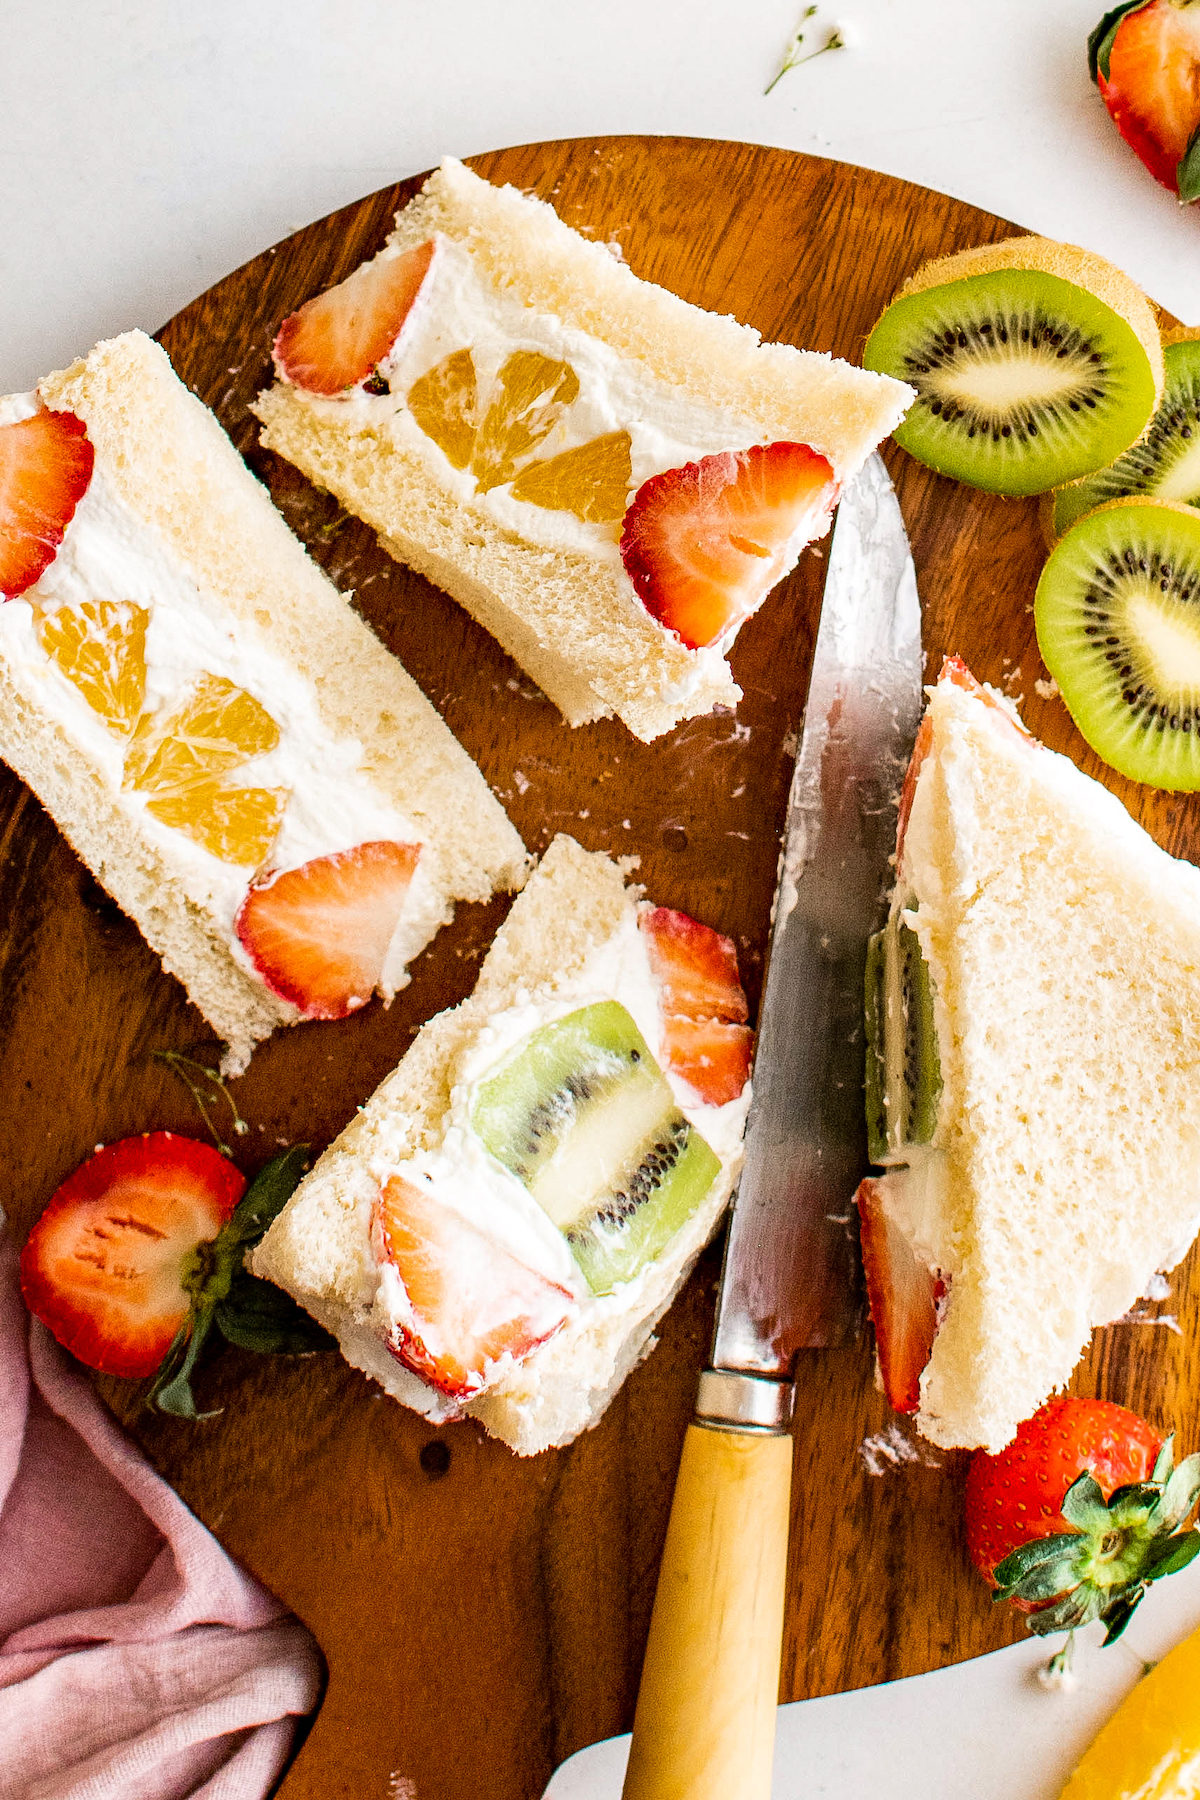 A wooden cutting board with fruit and a whipped cream sandwich.